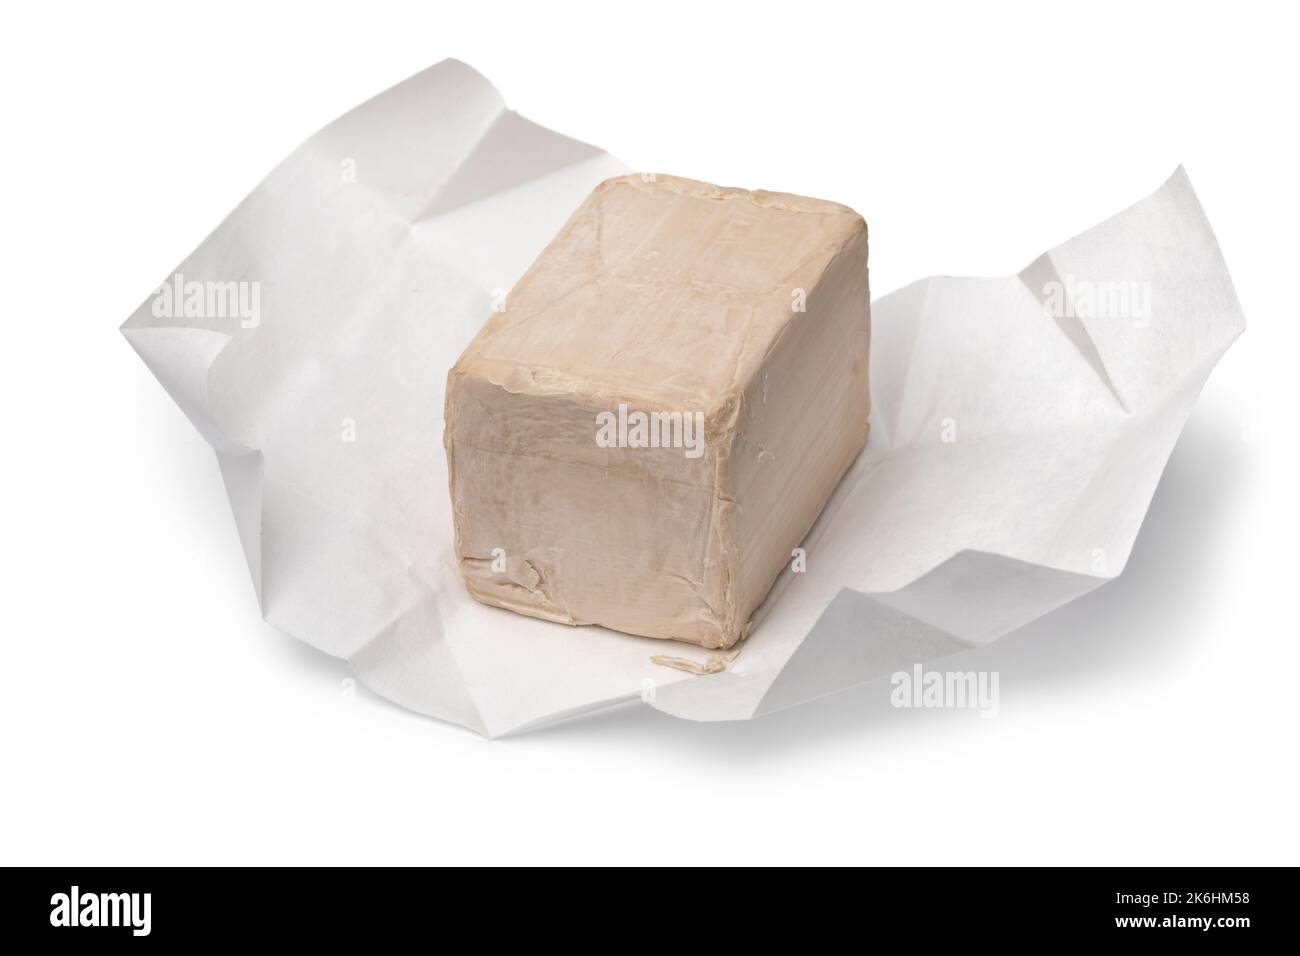 Single piece of fresh yeast on package paper isolated on white background close up Stock Photo